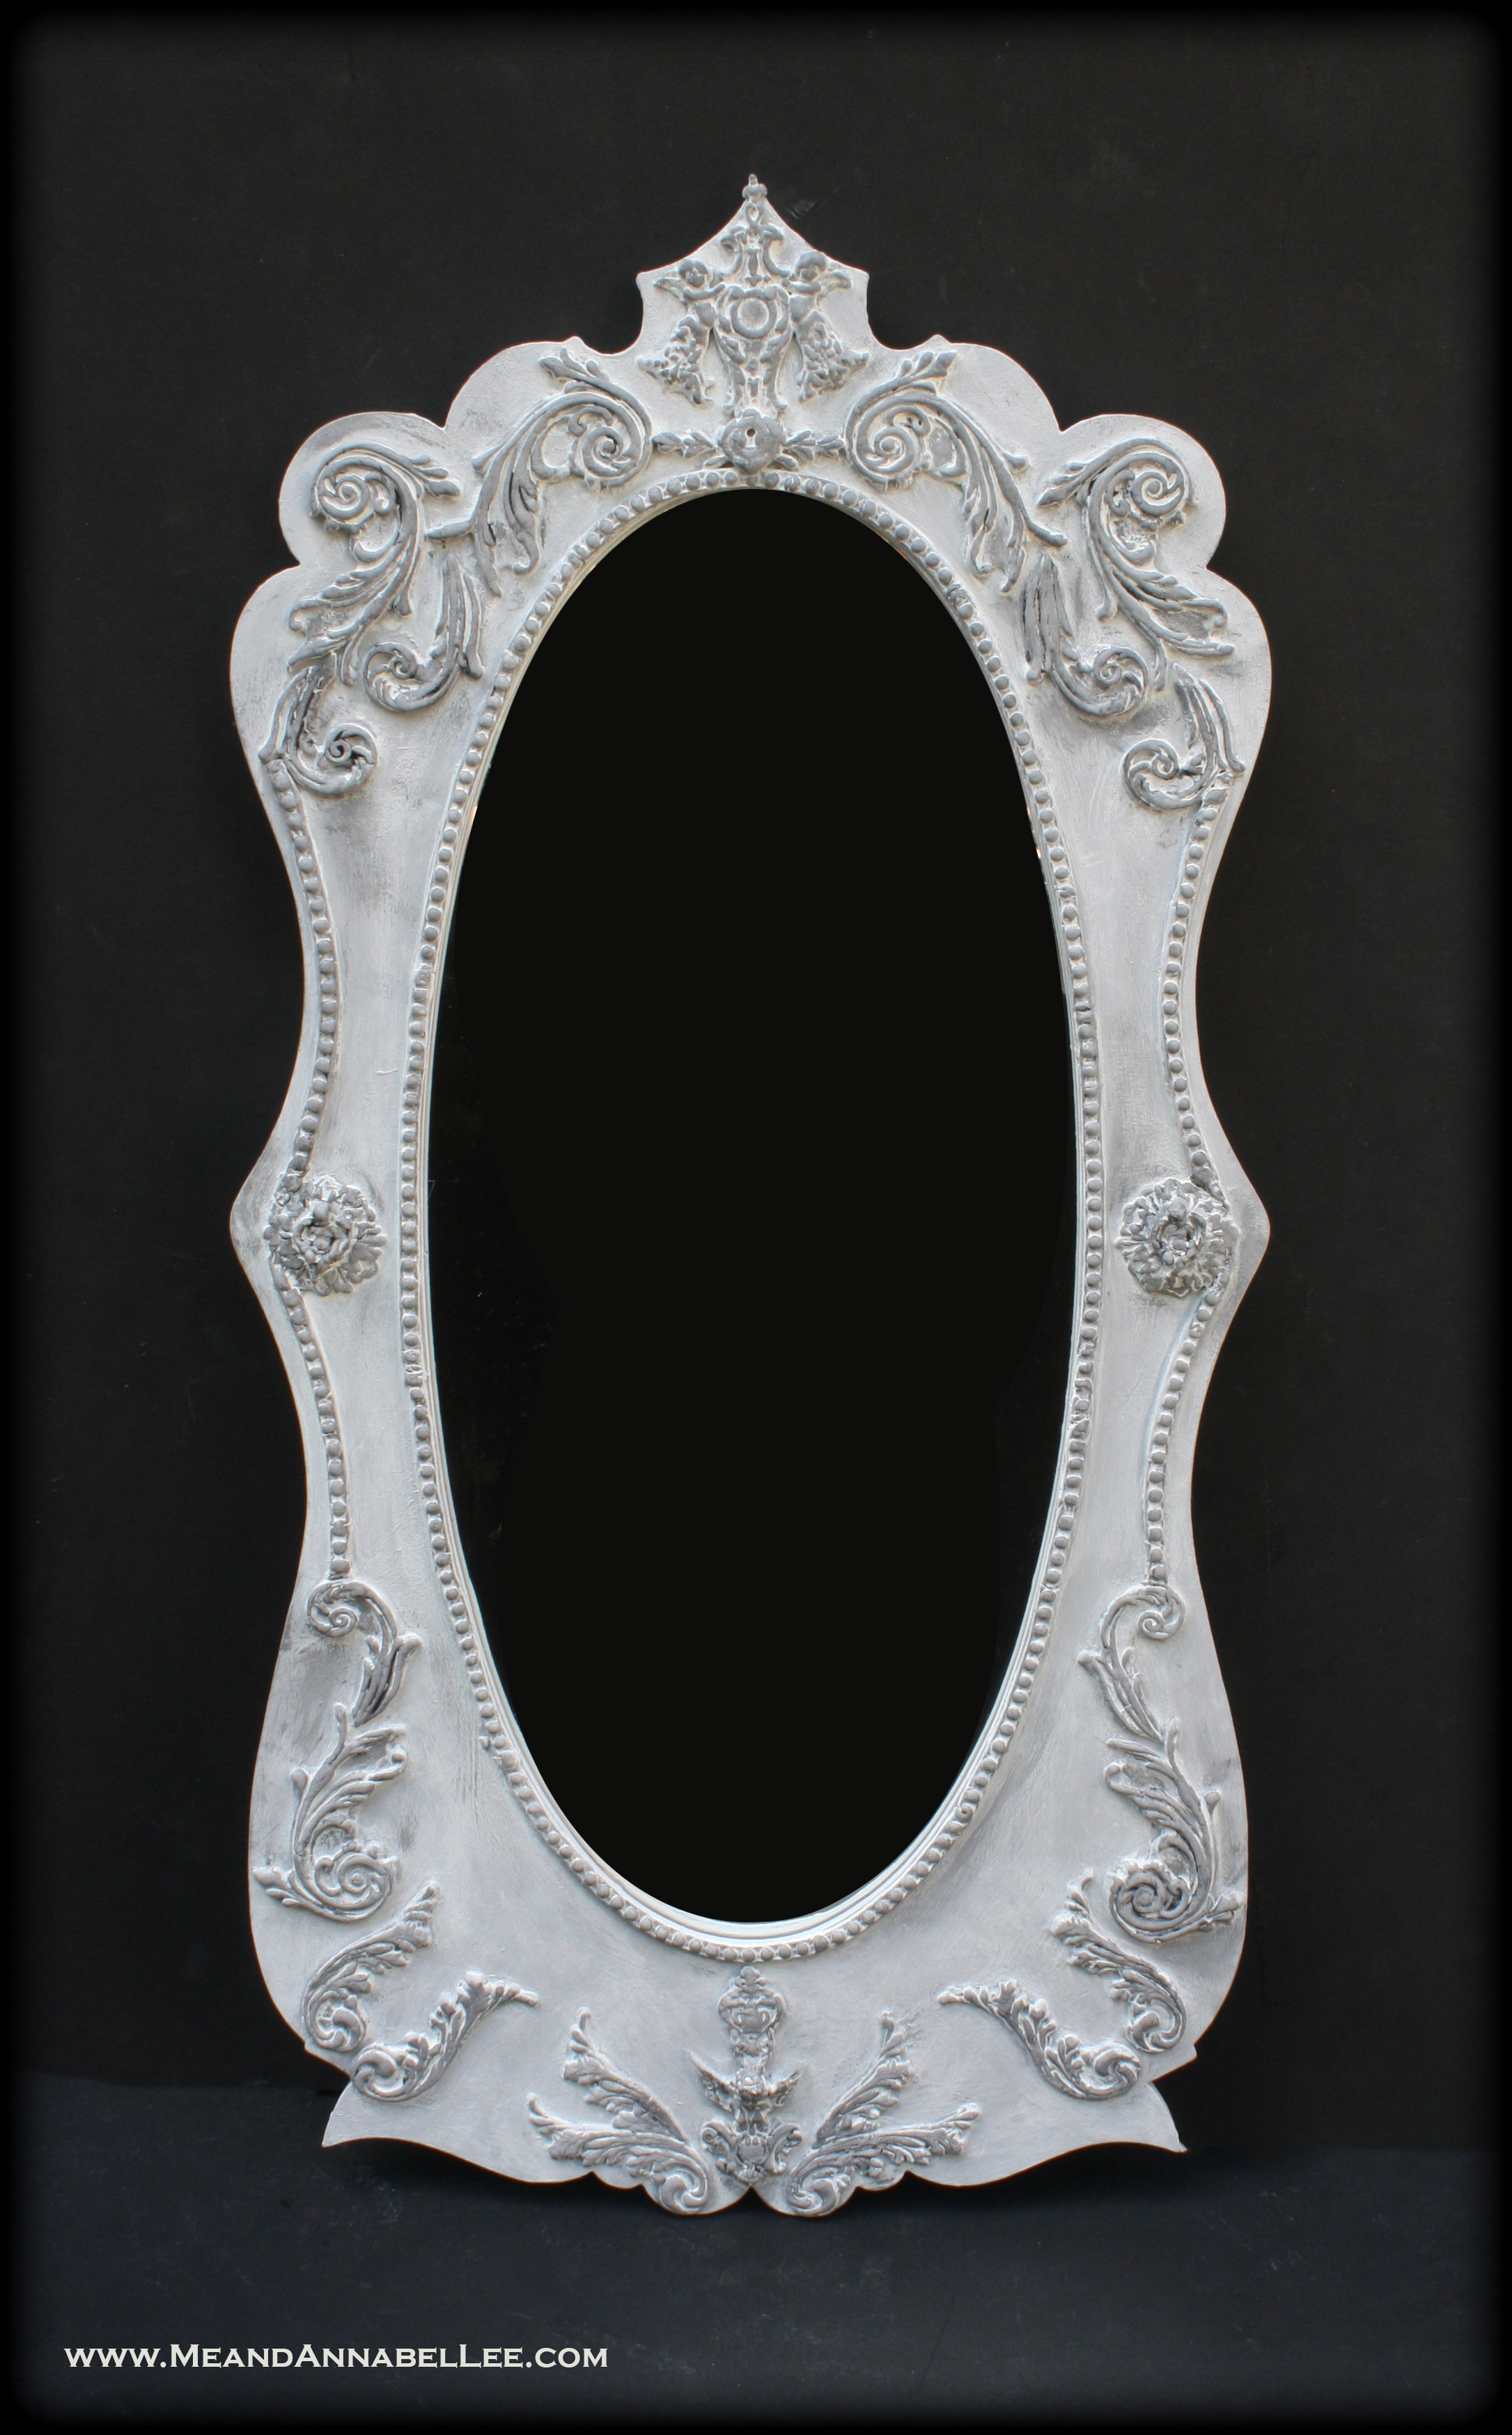 DIY Baroque Mirror in a Weathered Stone Grey Antique Finish | Faux Stone | Distress and Antique a Frame | Clay Casting | Faux Paint | www.MeandAnnabelLee.com